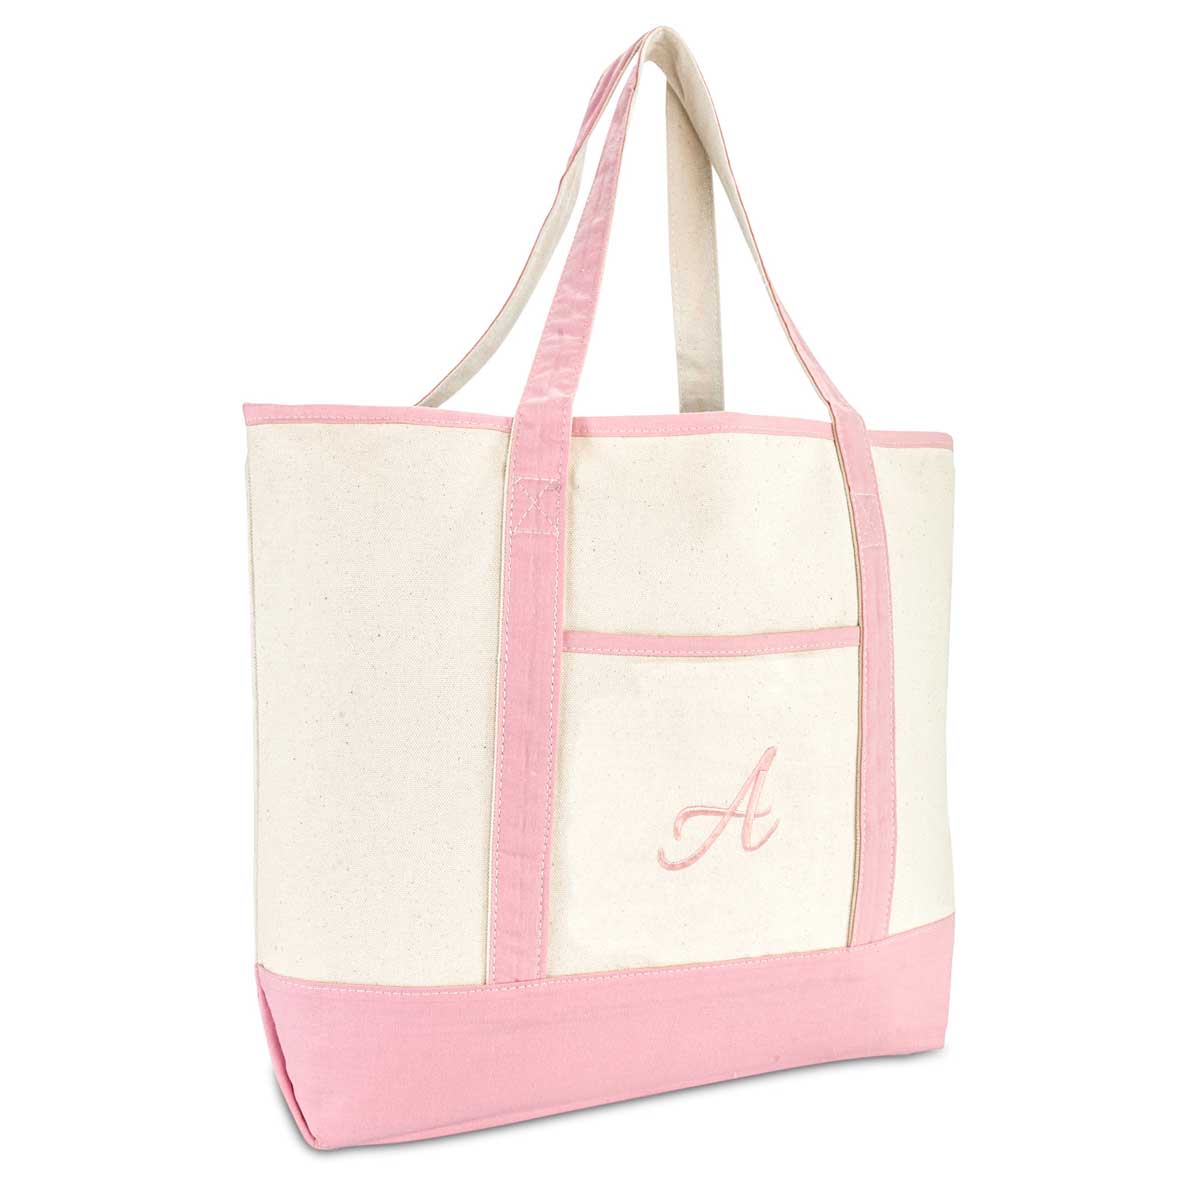 How to Monogram a Canvas Tote Bag - Monogram Monday Embroidery